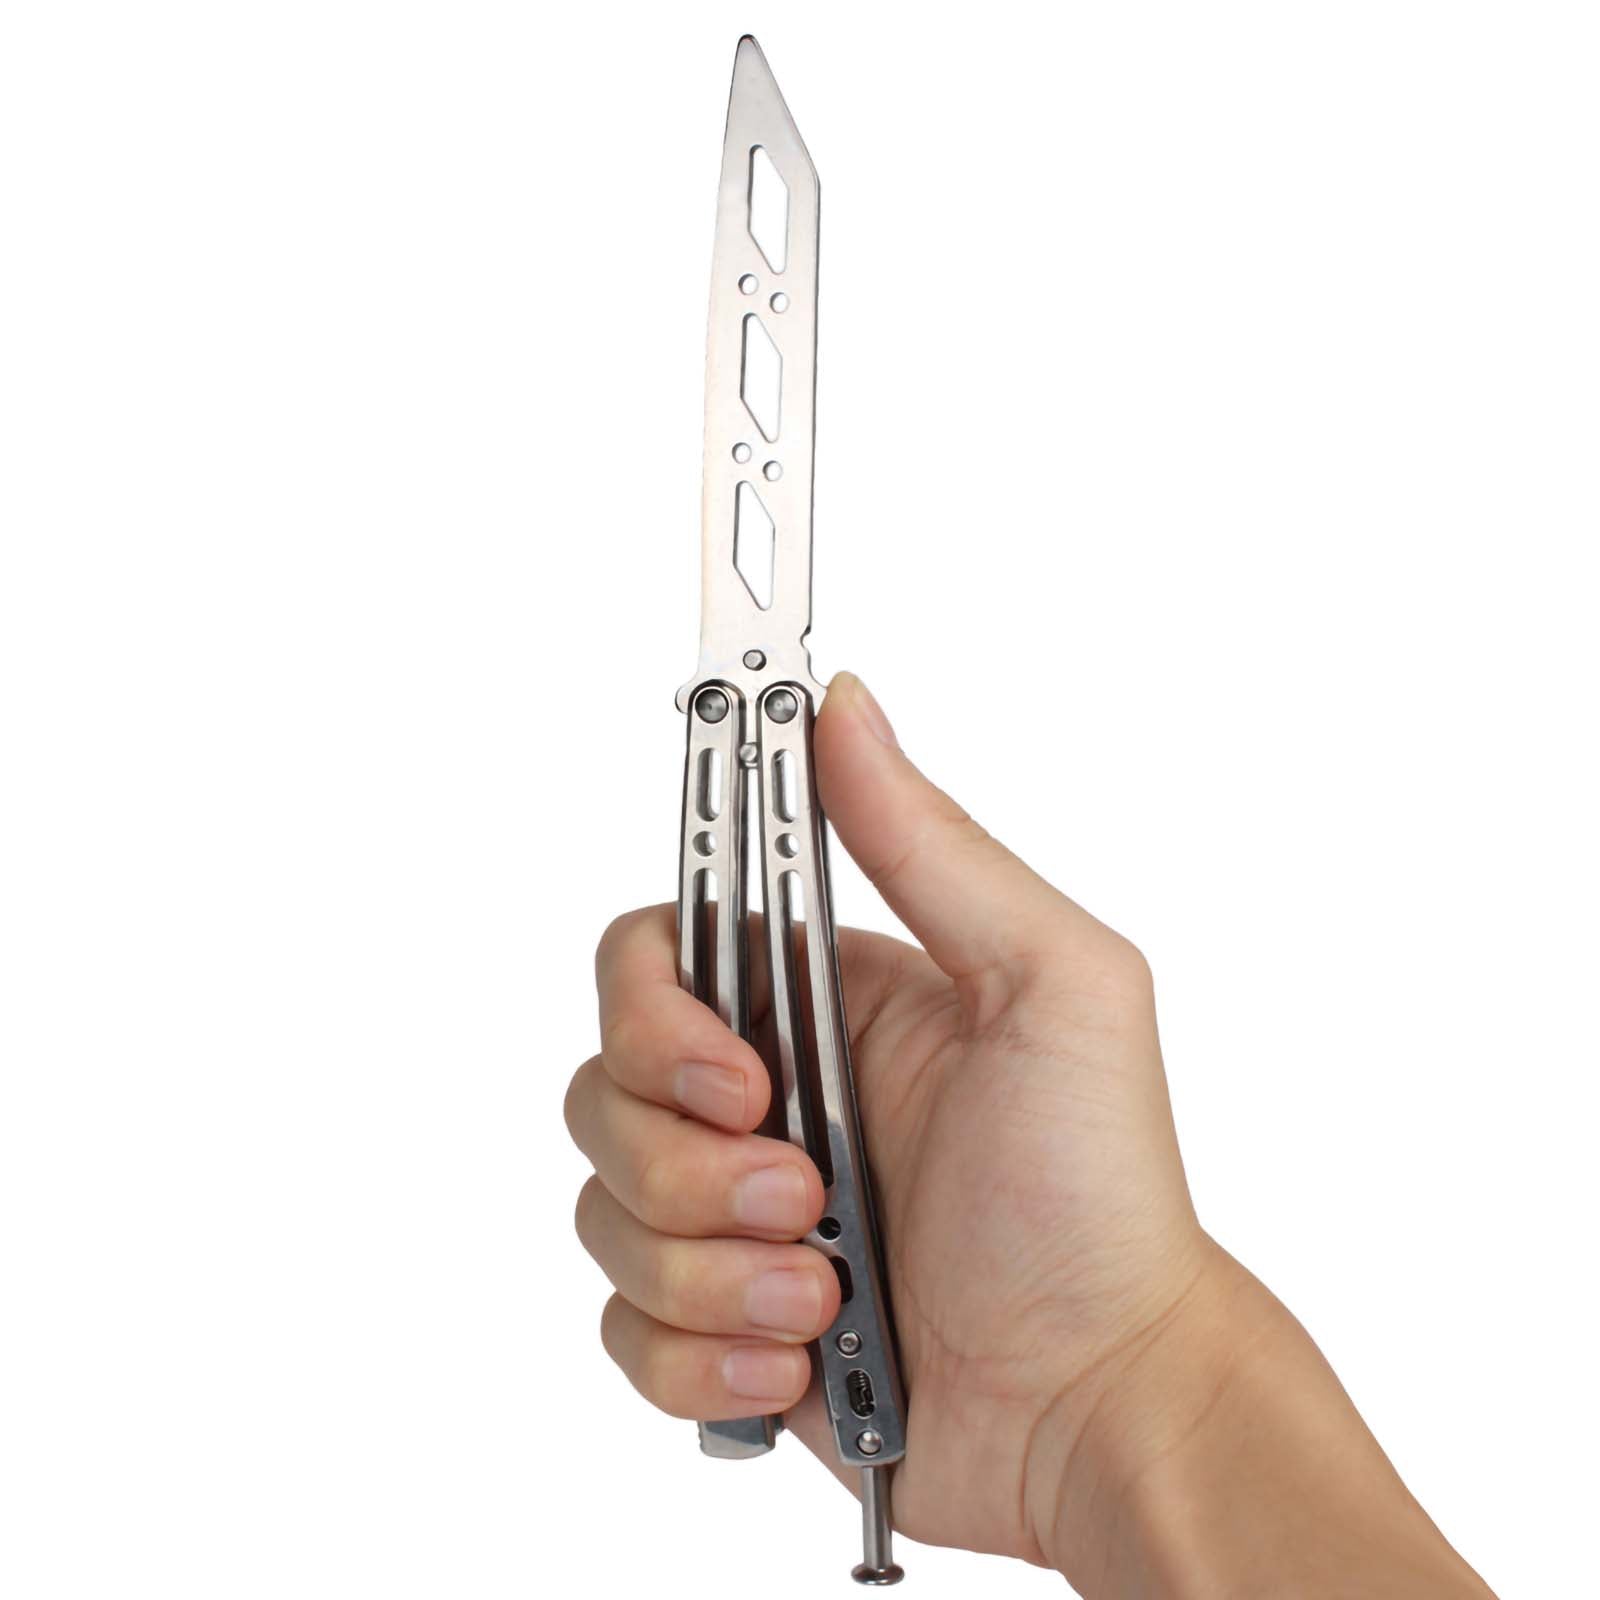 Andux Balisong Training Tool CS/HDD29 Silvery(Only Available in European Countries)